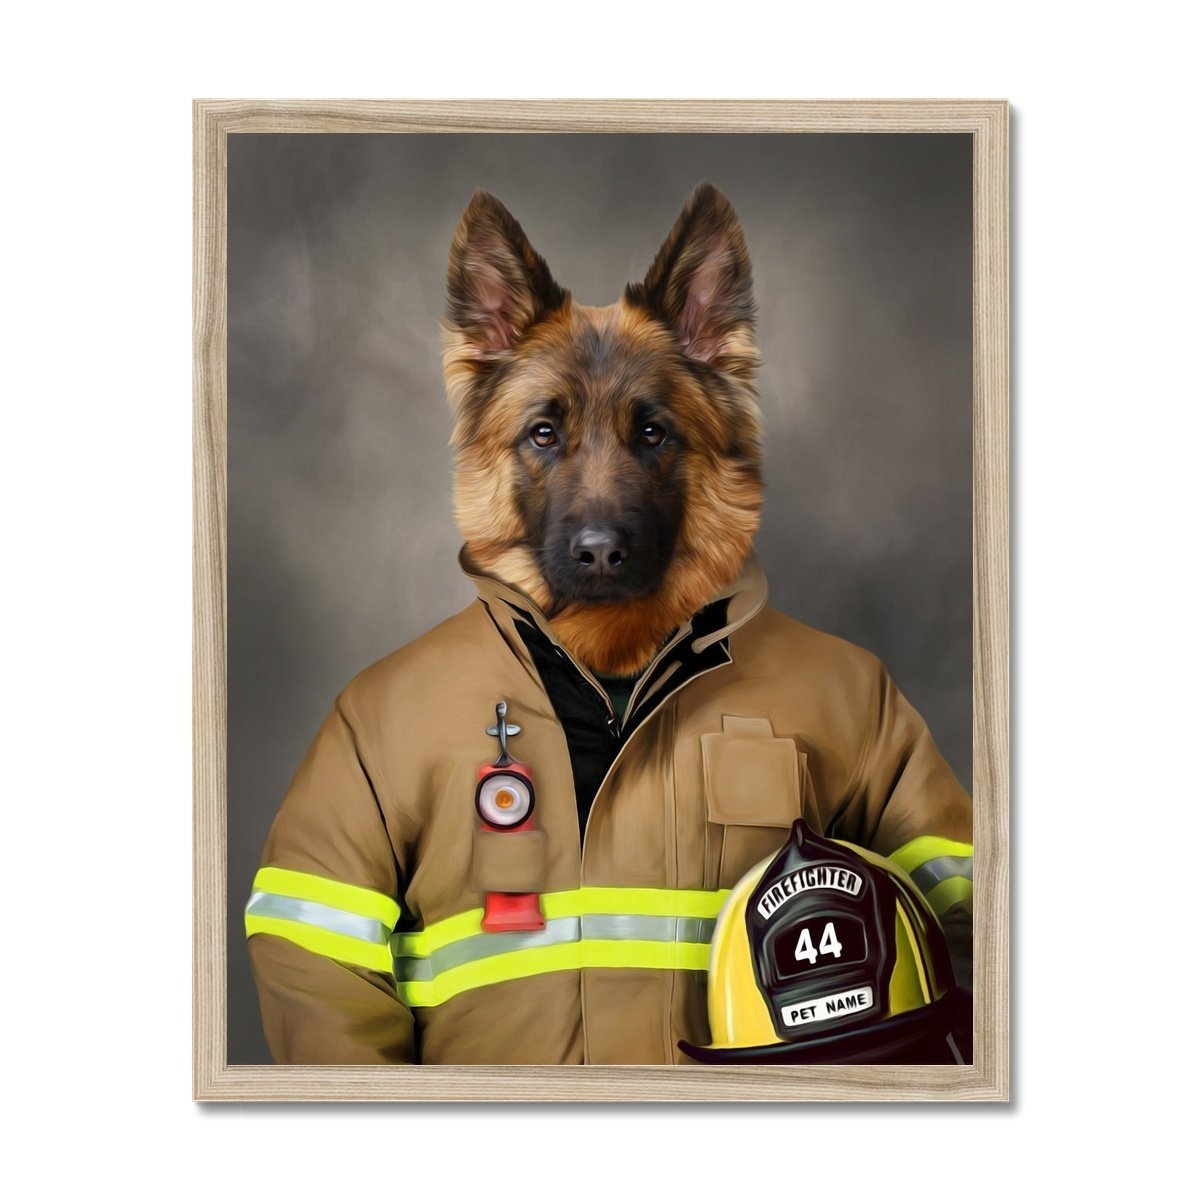 Paw & Glory, paw and glory, for pet portraits, the general portrait, funny dog paintings, professional pet photos, dog portraits as humans, in home pet photography, pet portrait